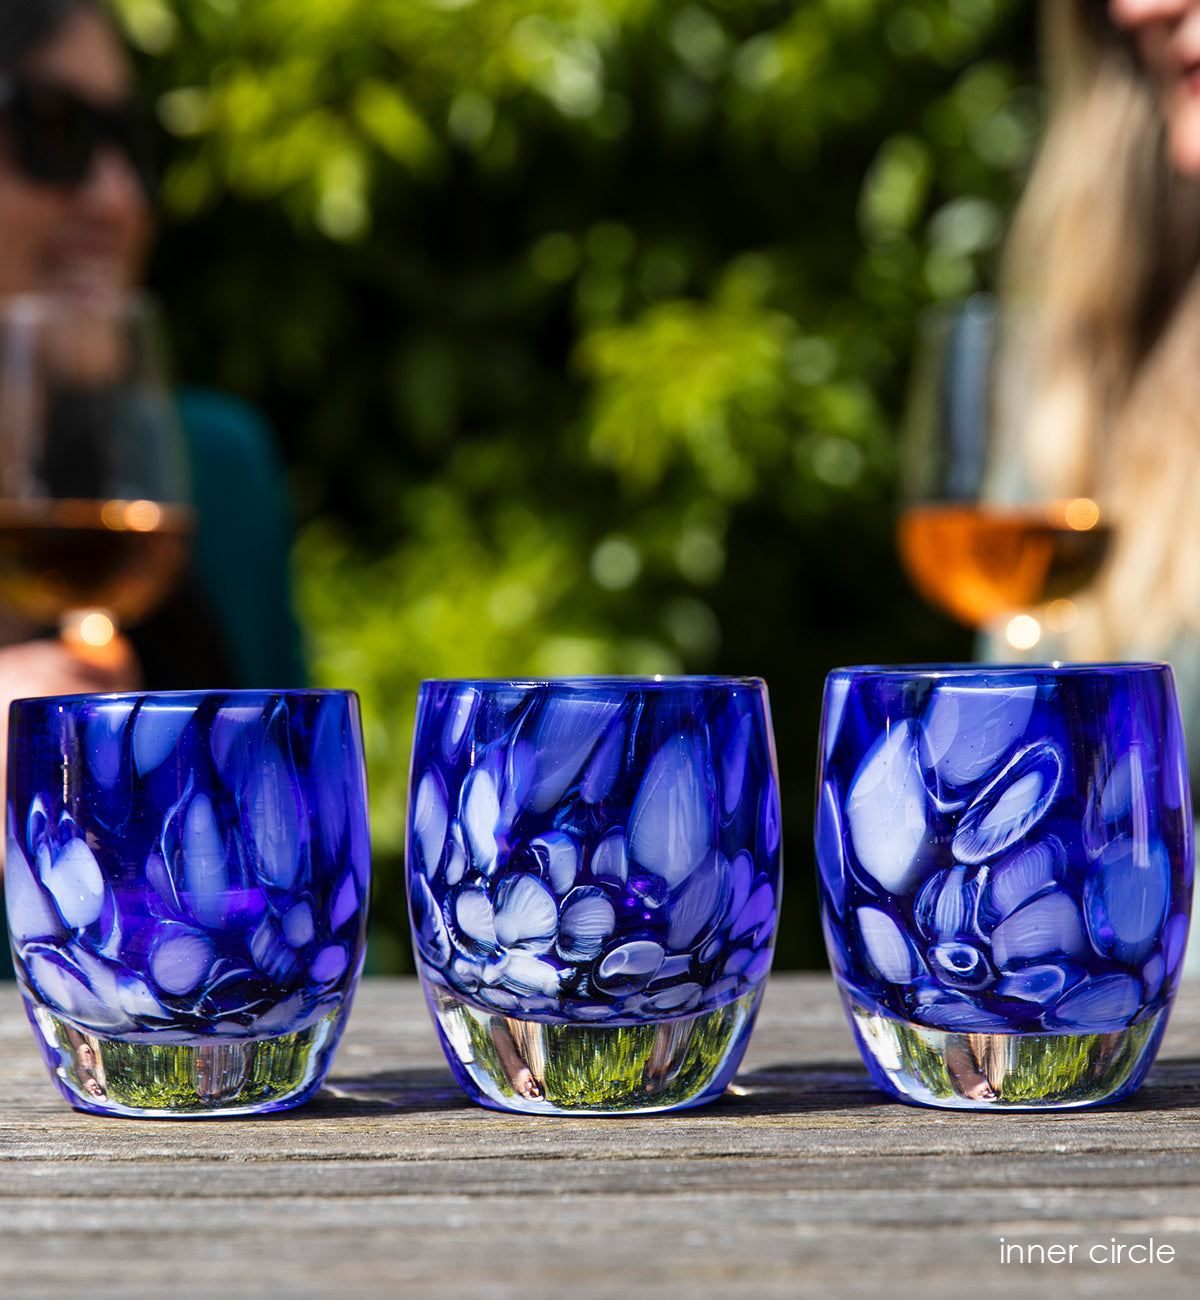 three inner circle, translucent dark blue and white murrini hand-blown glass votive candle holders on a wood outdoor table, with two friends smiling and enjoying wine in the background.